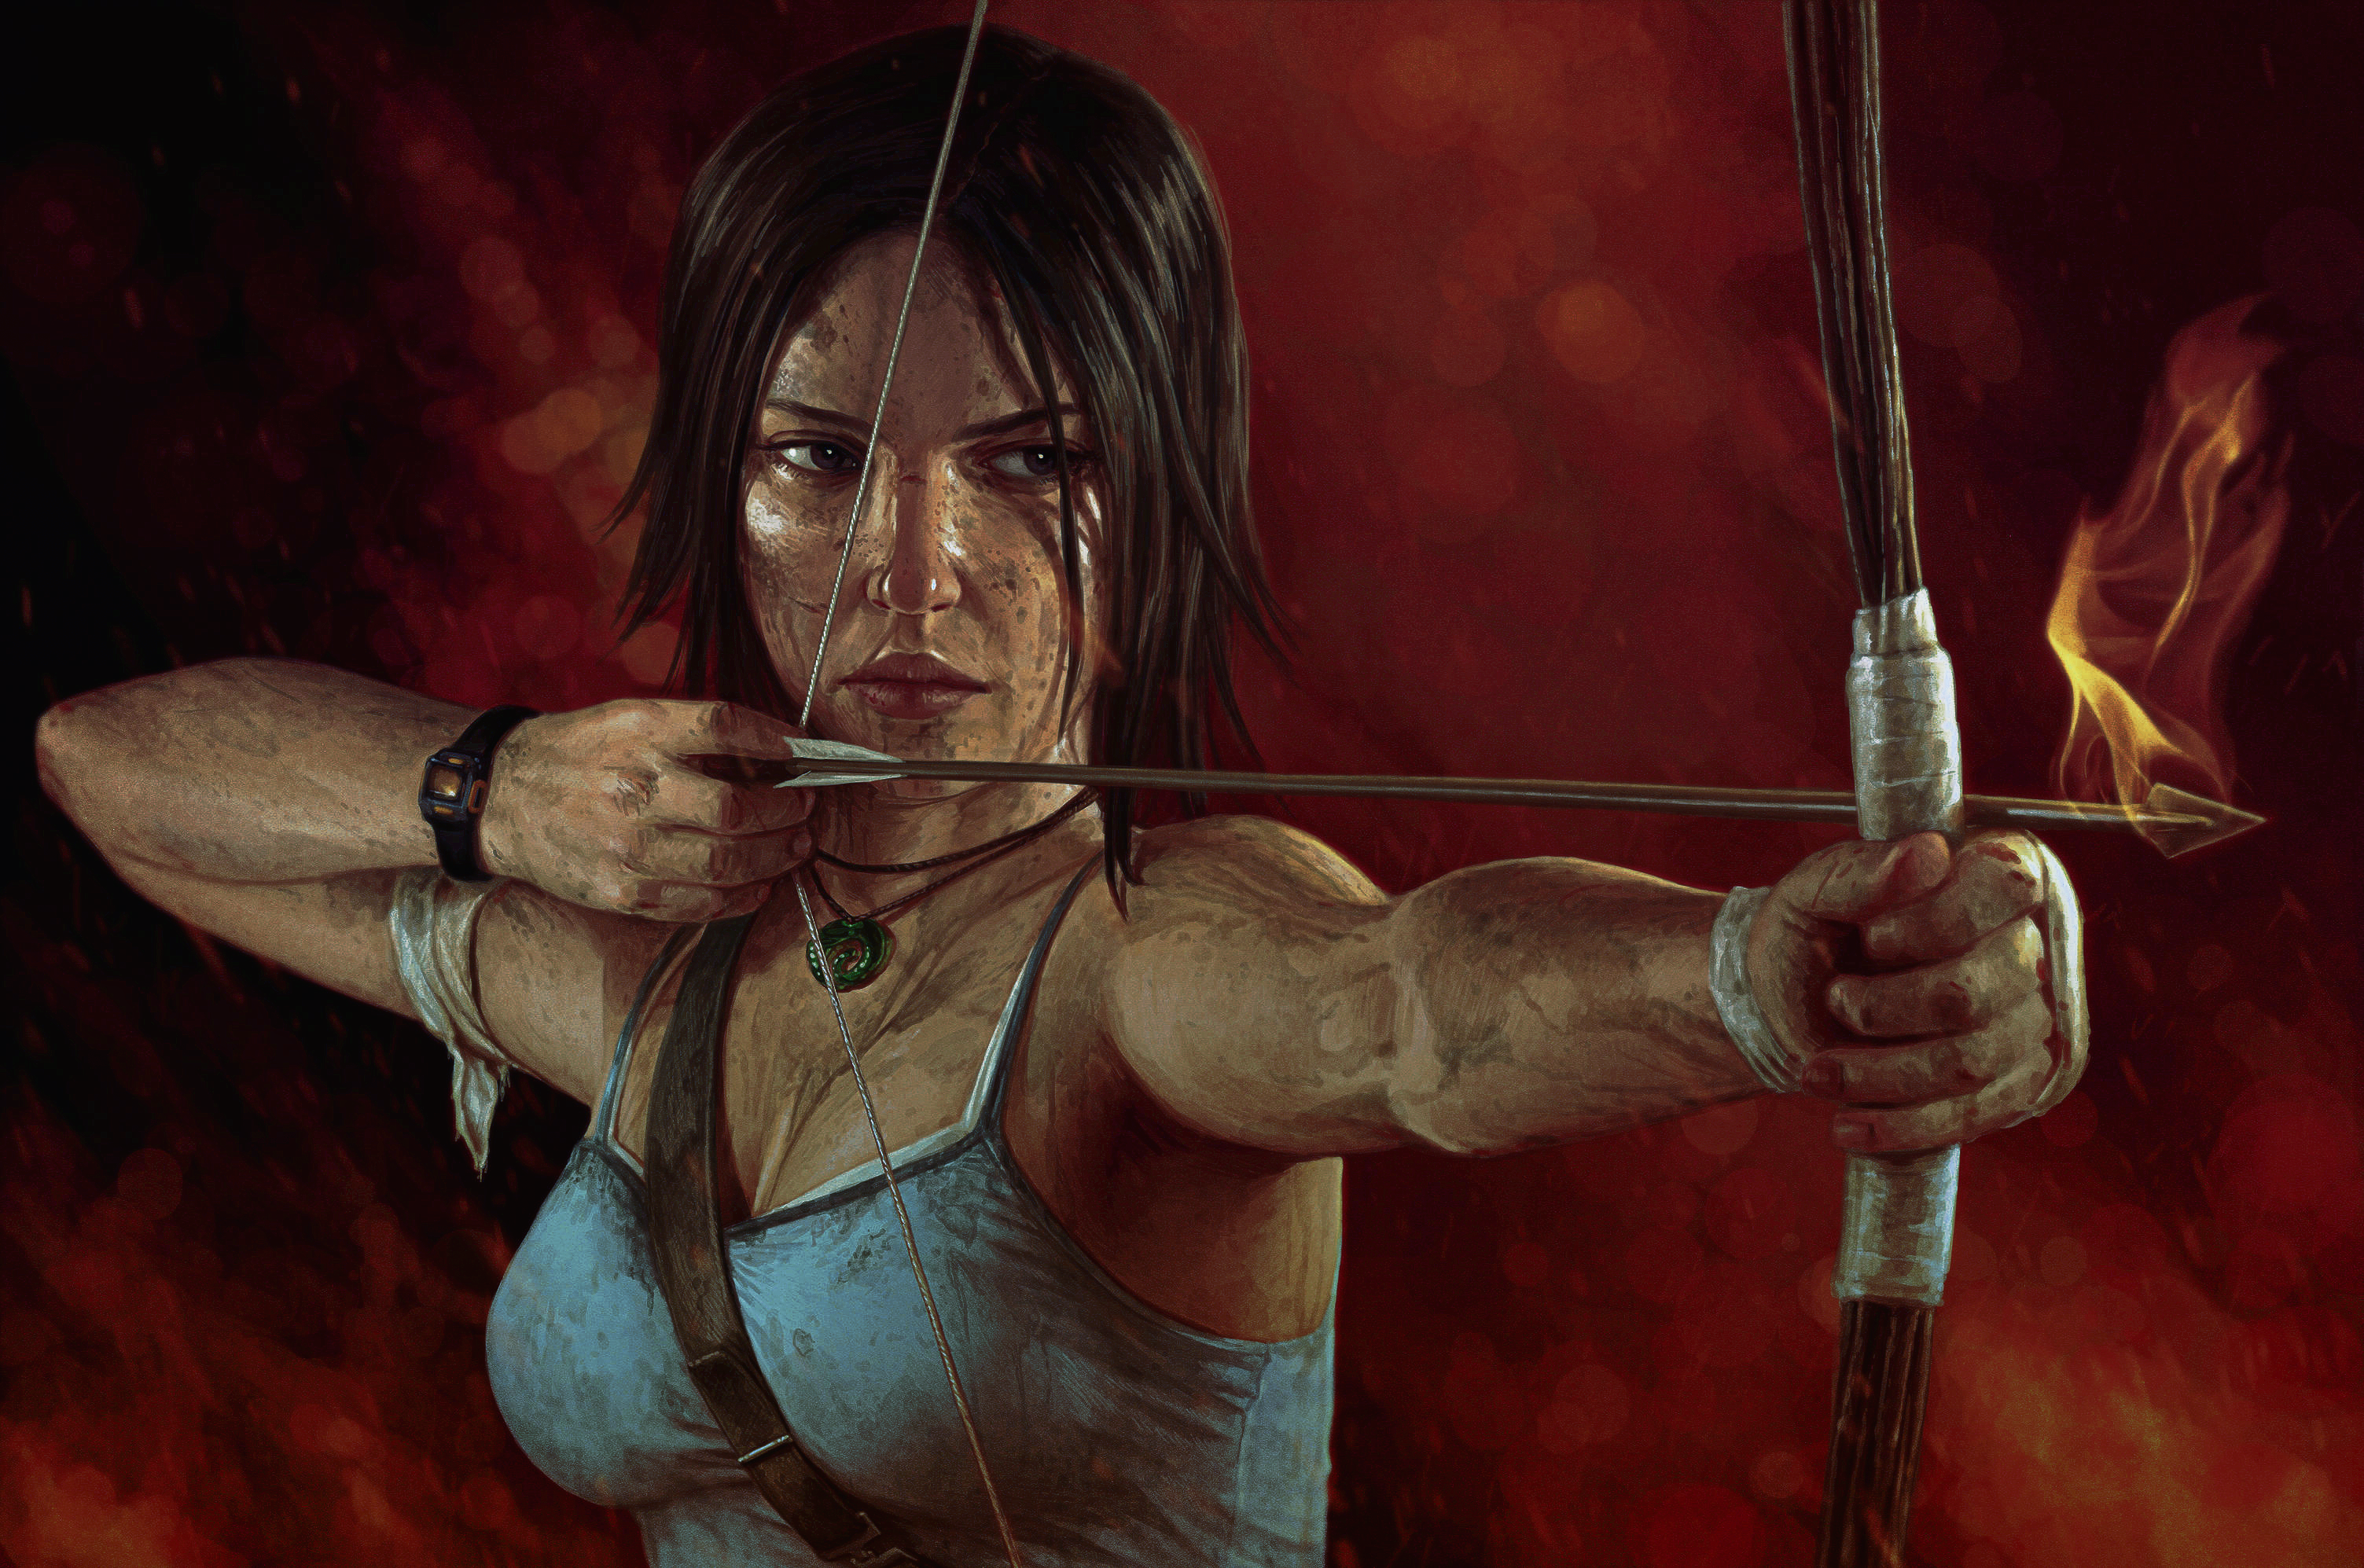 Lara Croft Tomb Raider Tomb Raider 2013 Arrows Young Woman Game Characters Video Game Characters Bow 3007x1995